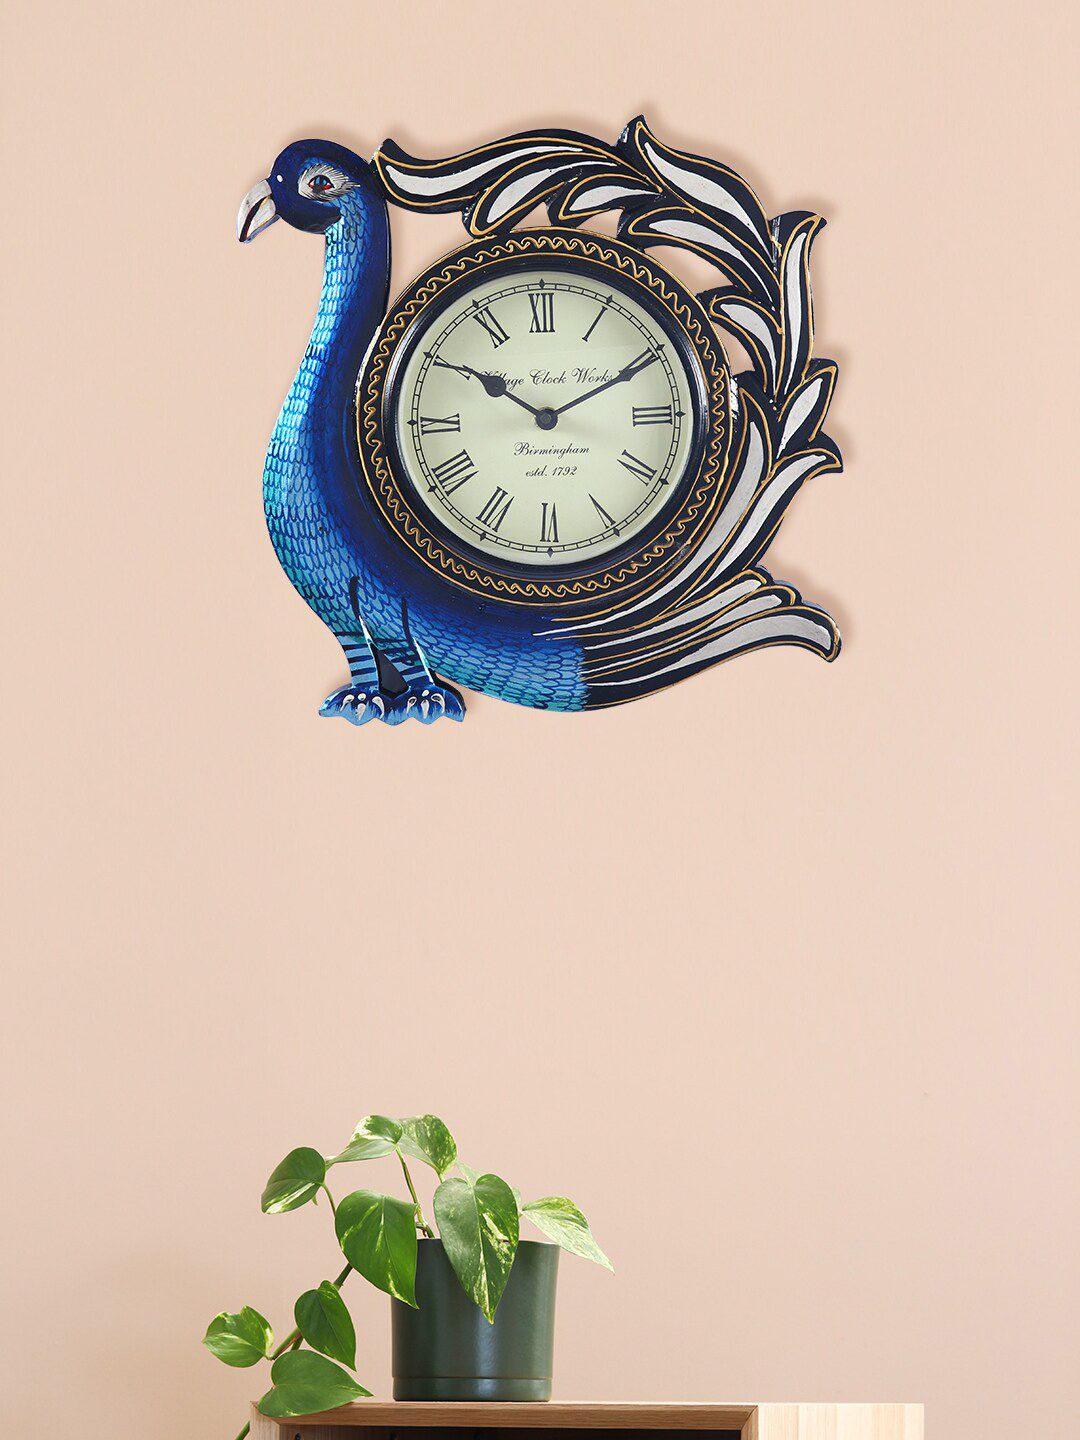 Aapno Rajasthan Blue & Black Textured Animal Shaped Traditional Wall Clock Price in India